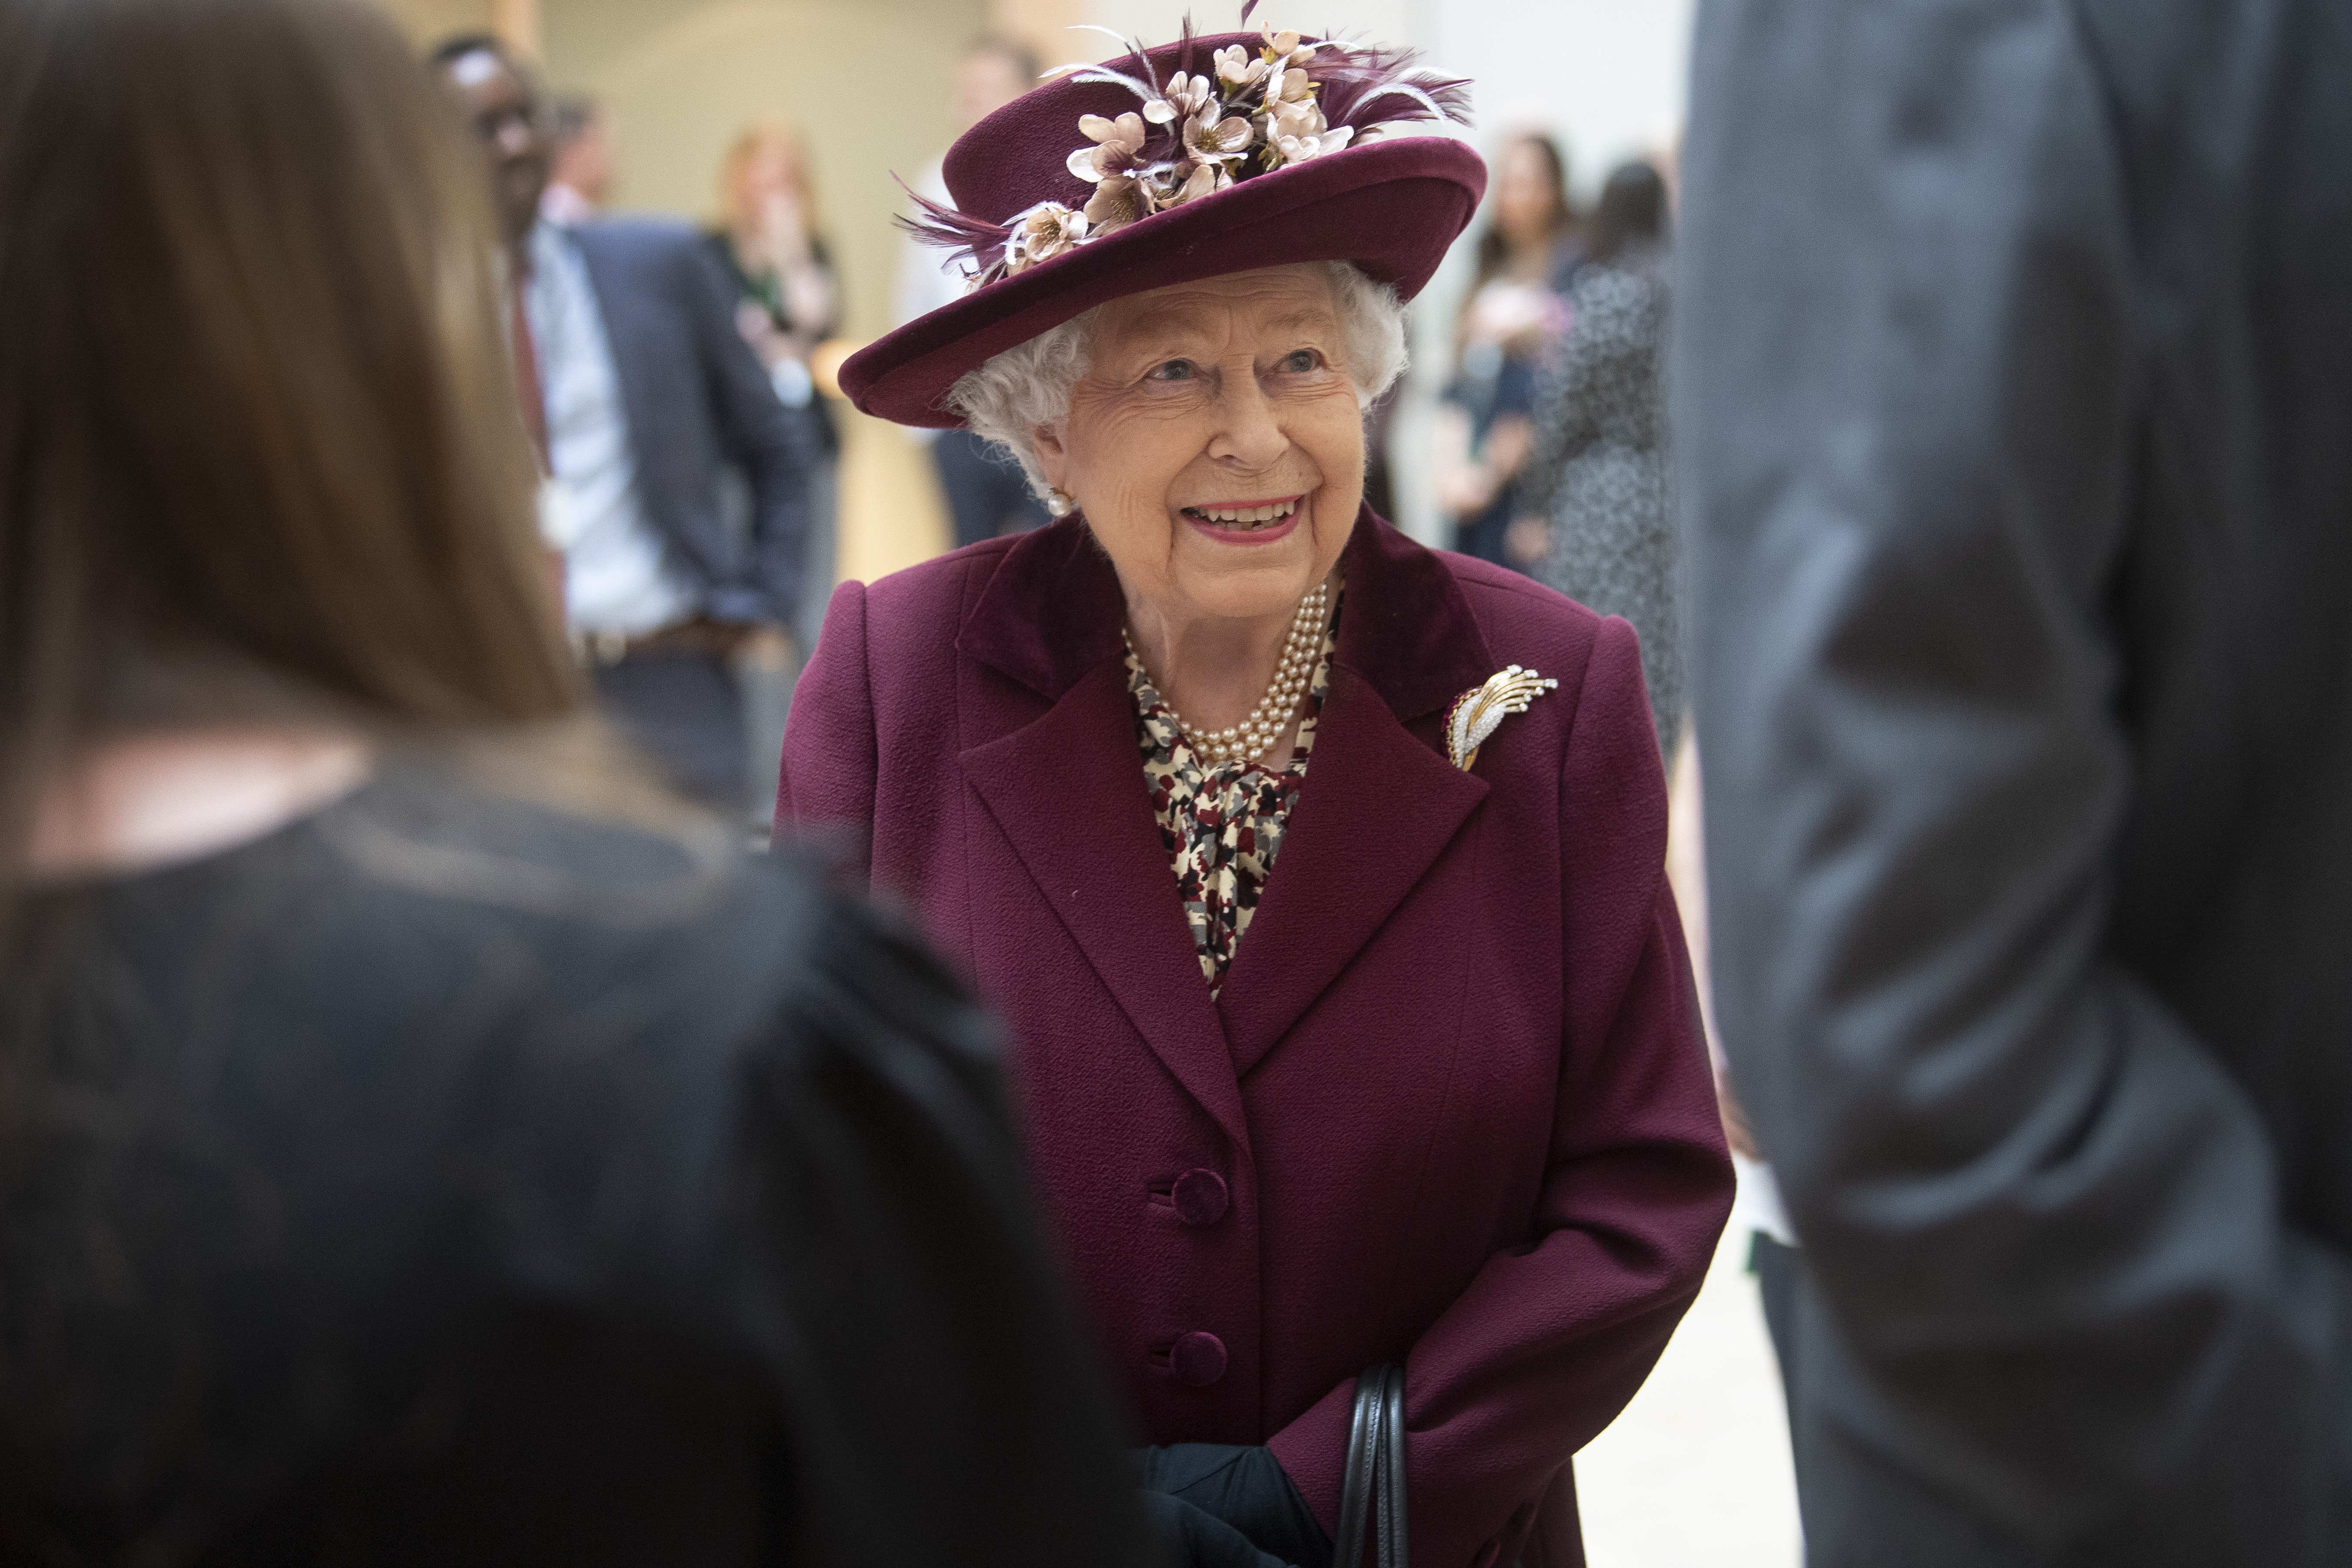 Queen Elizabeth II talks with MI5 officers during a visit to the headquarters of MI5 at Thames House on February 25, 2020. | Photo: GettyImages